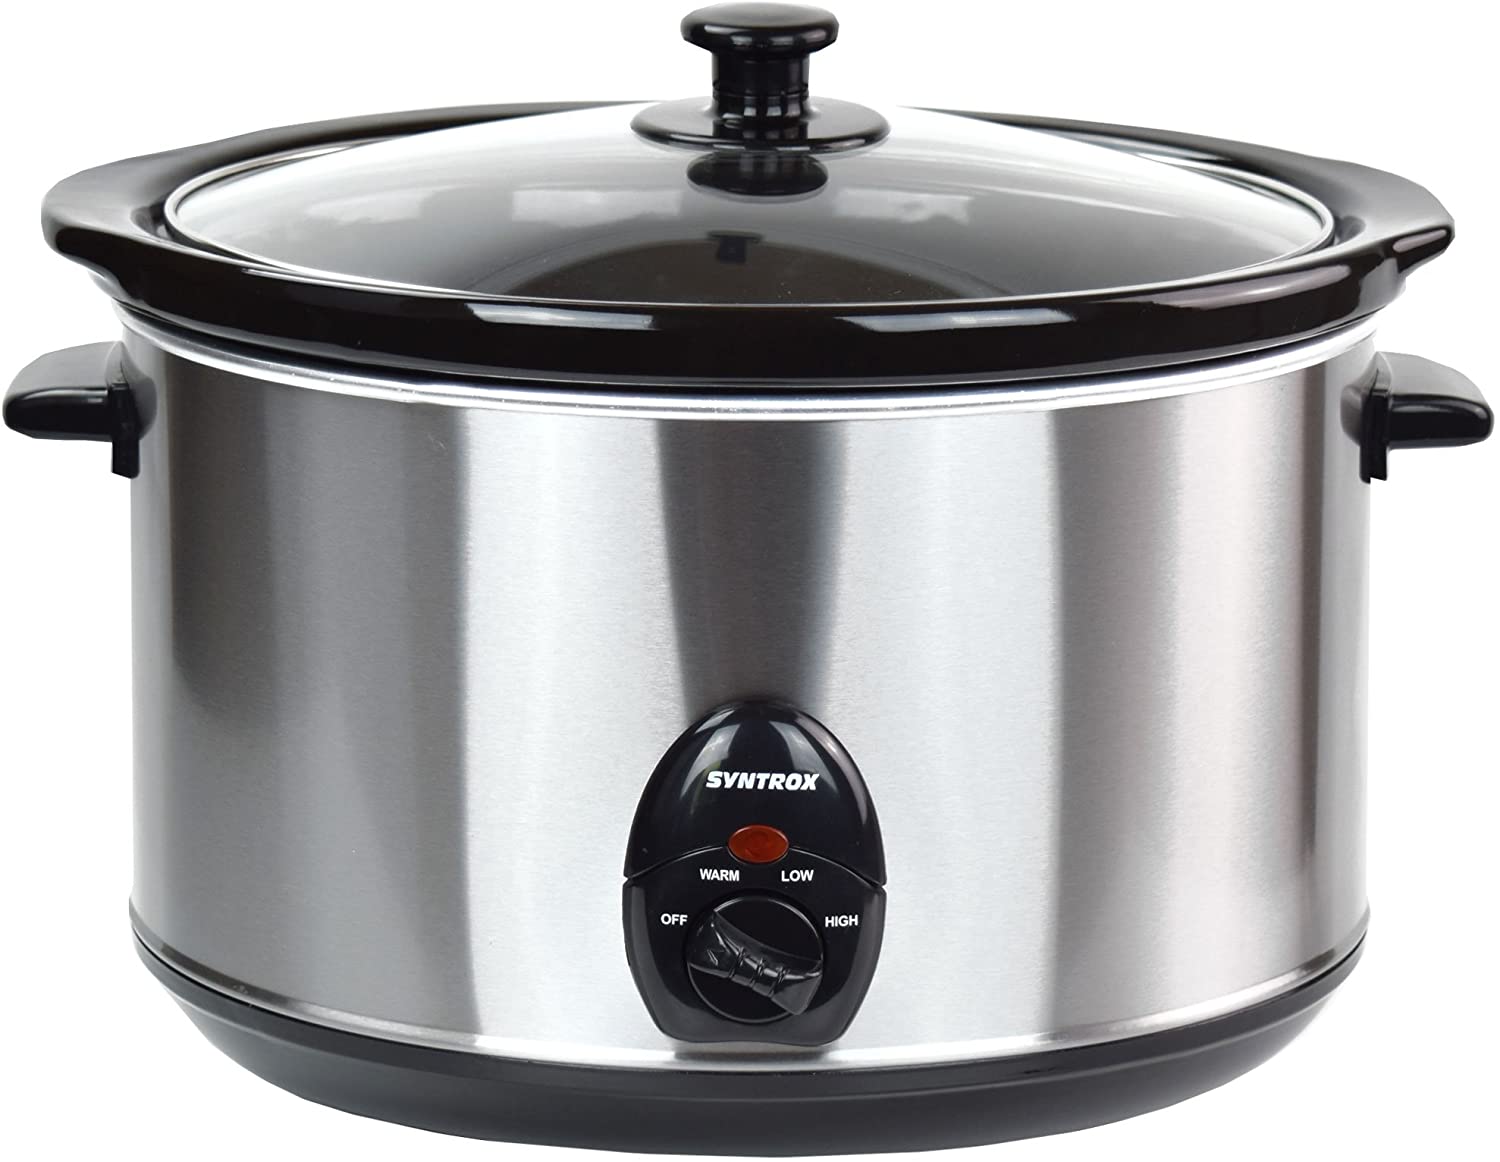 Syntrox Germany 5.6 Litre Stainless Steel Slow Cooker with Warming Function, Safety Glass and Removable Bowl – Langsa Mgarer Scho Ngarer